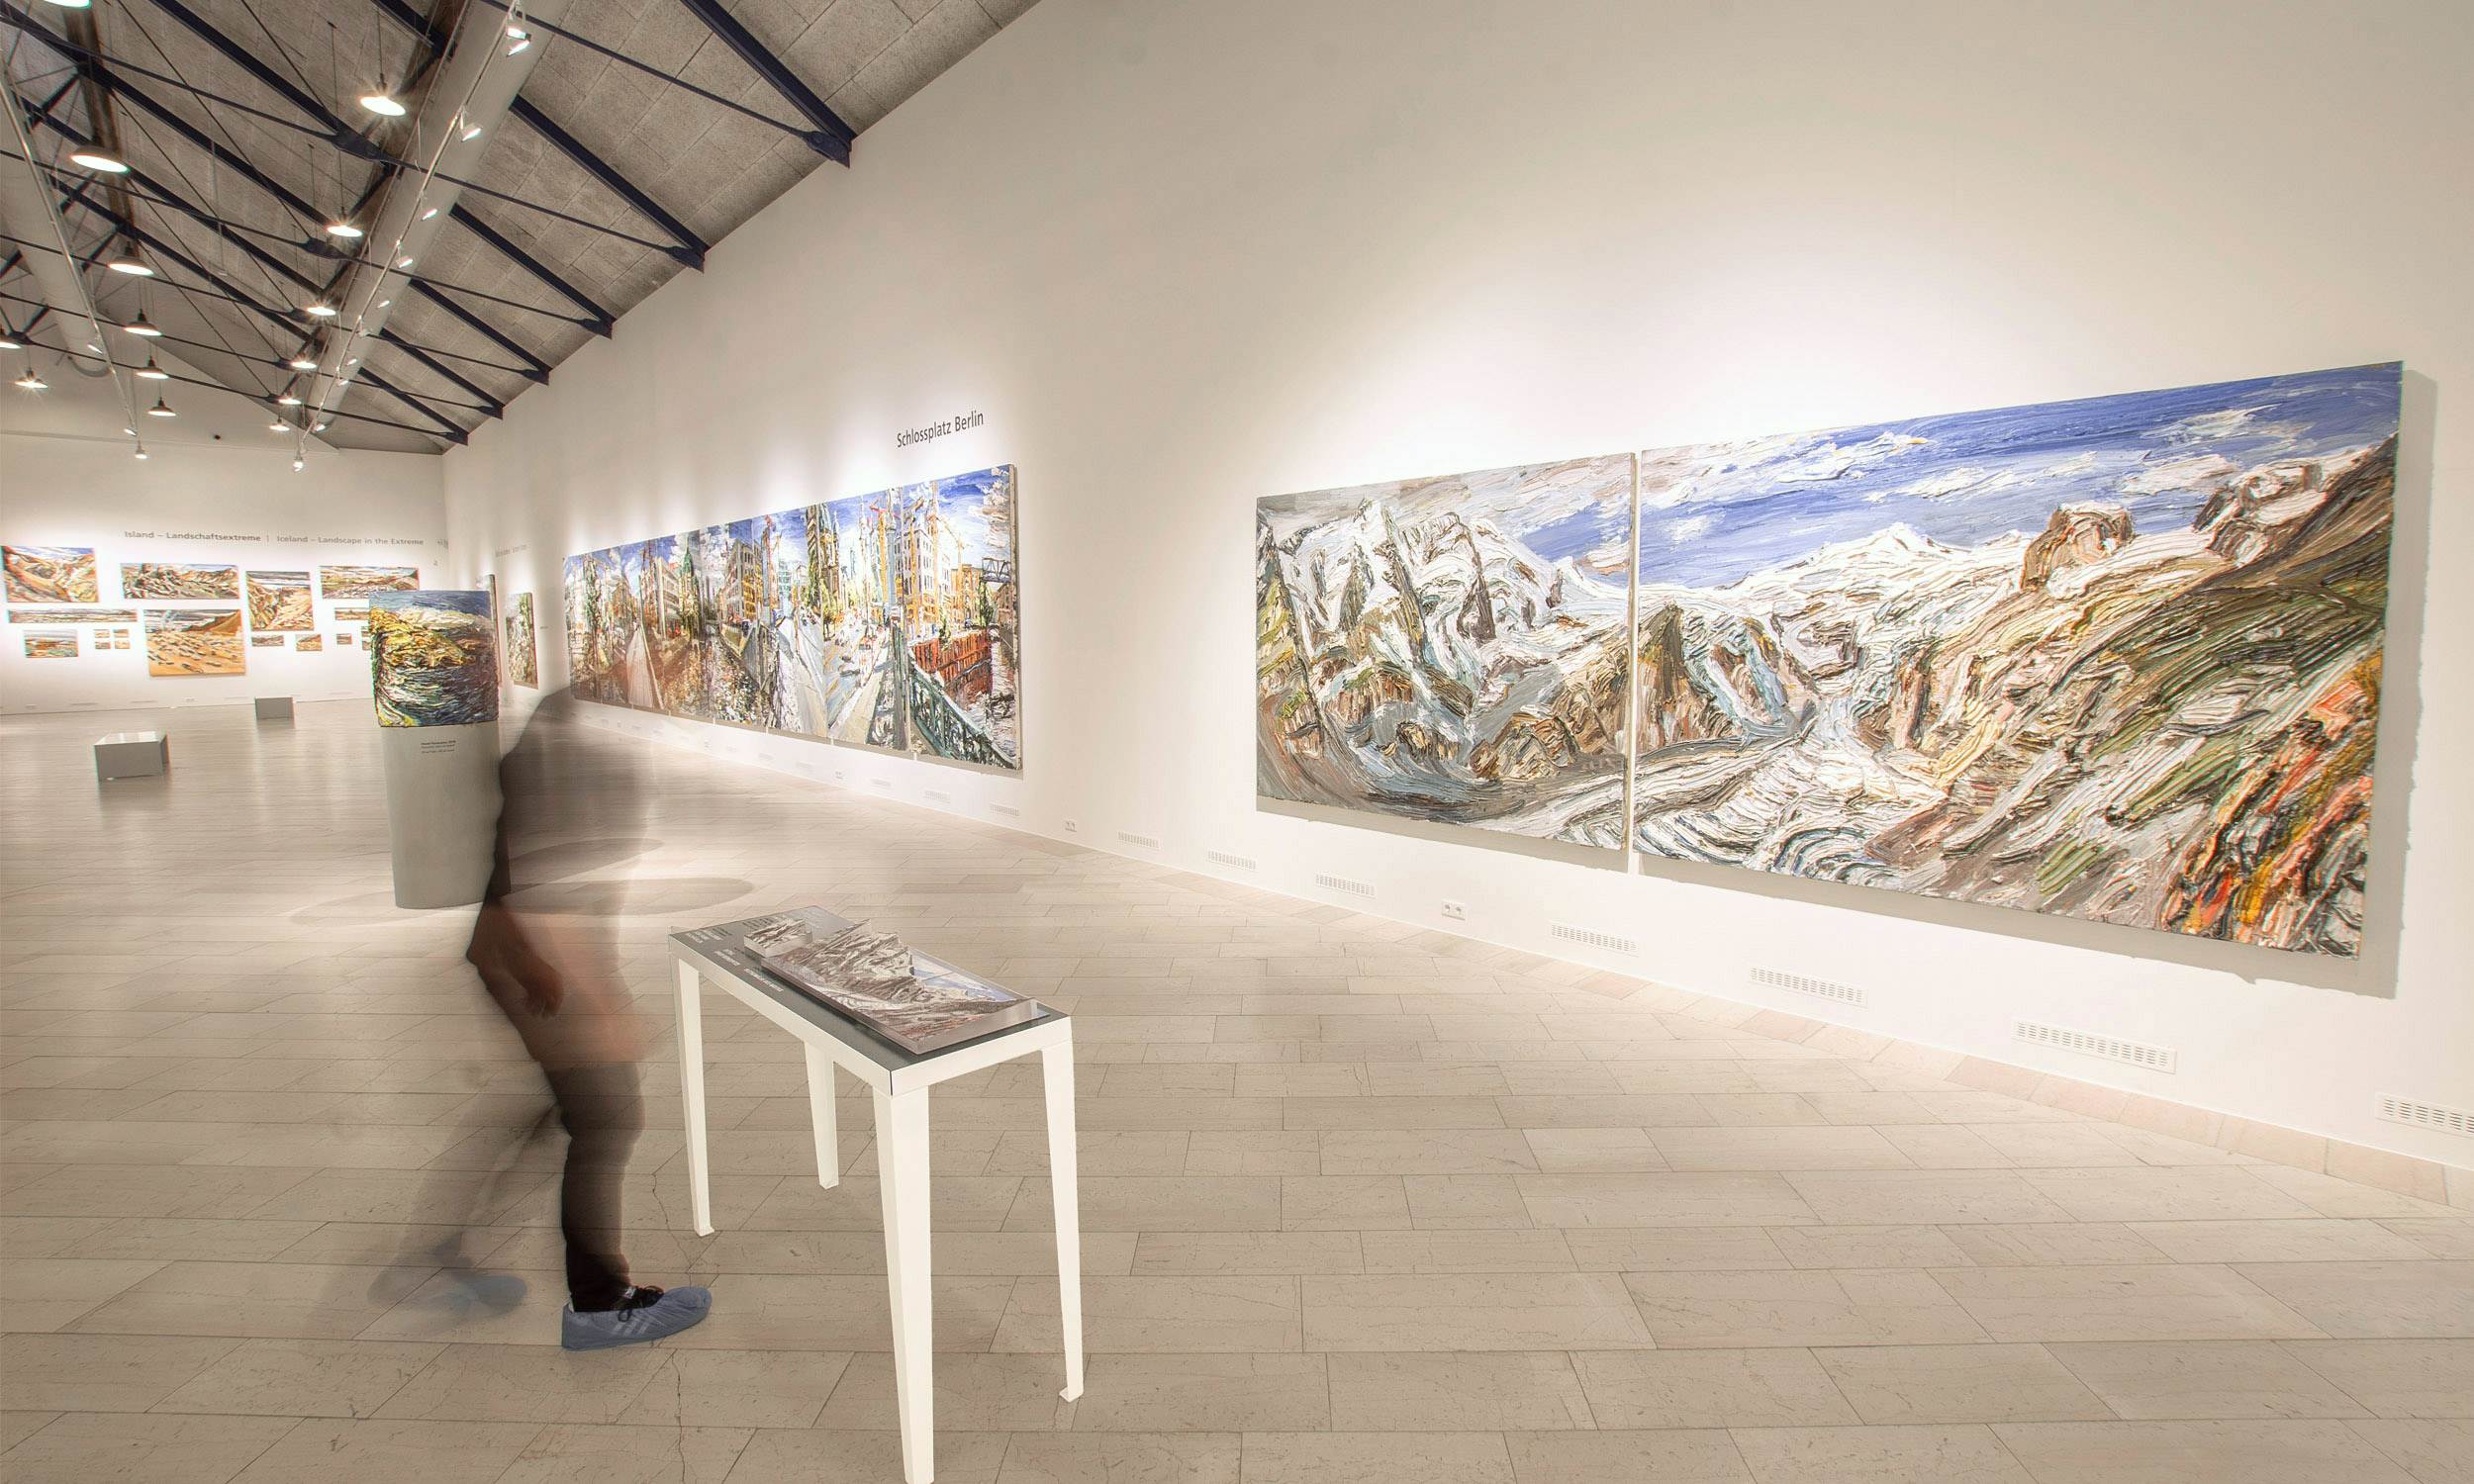 View into a long exhibition hall. On the right on the walls the paintings of the artist. At the very front the painting "Bergwelten", in front of which the corresponding tactile model can be seen on a table. At the table, out of focus, a person.